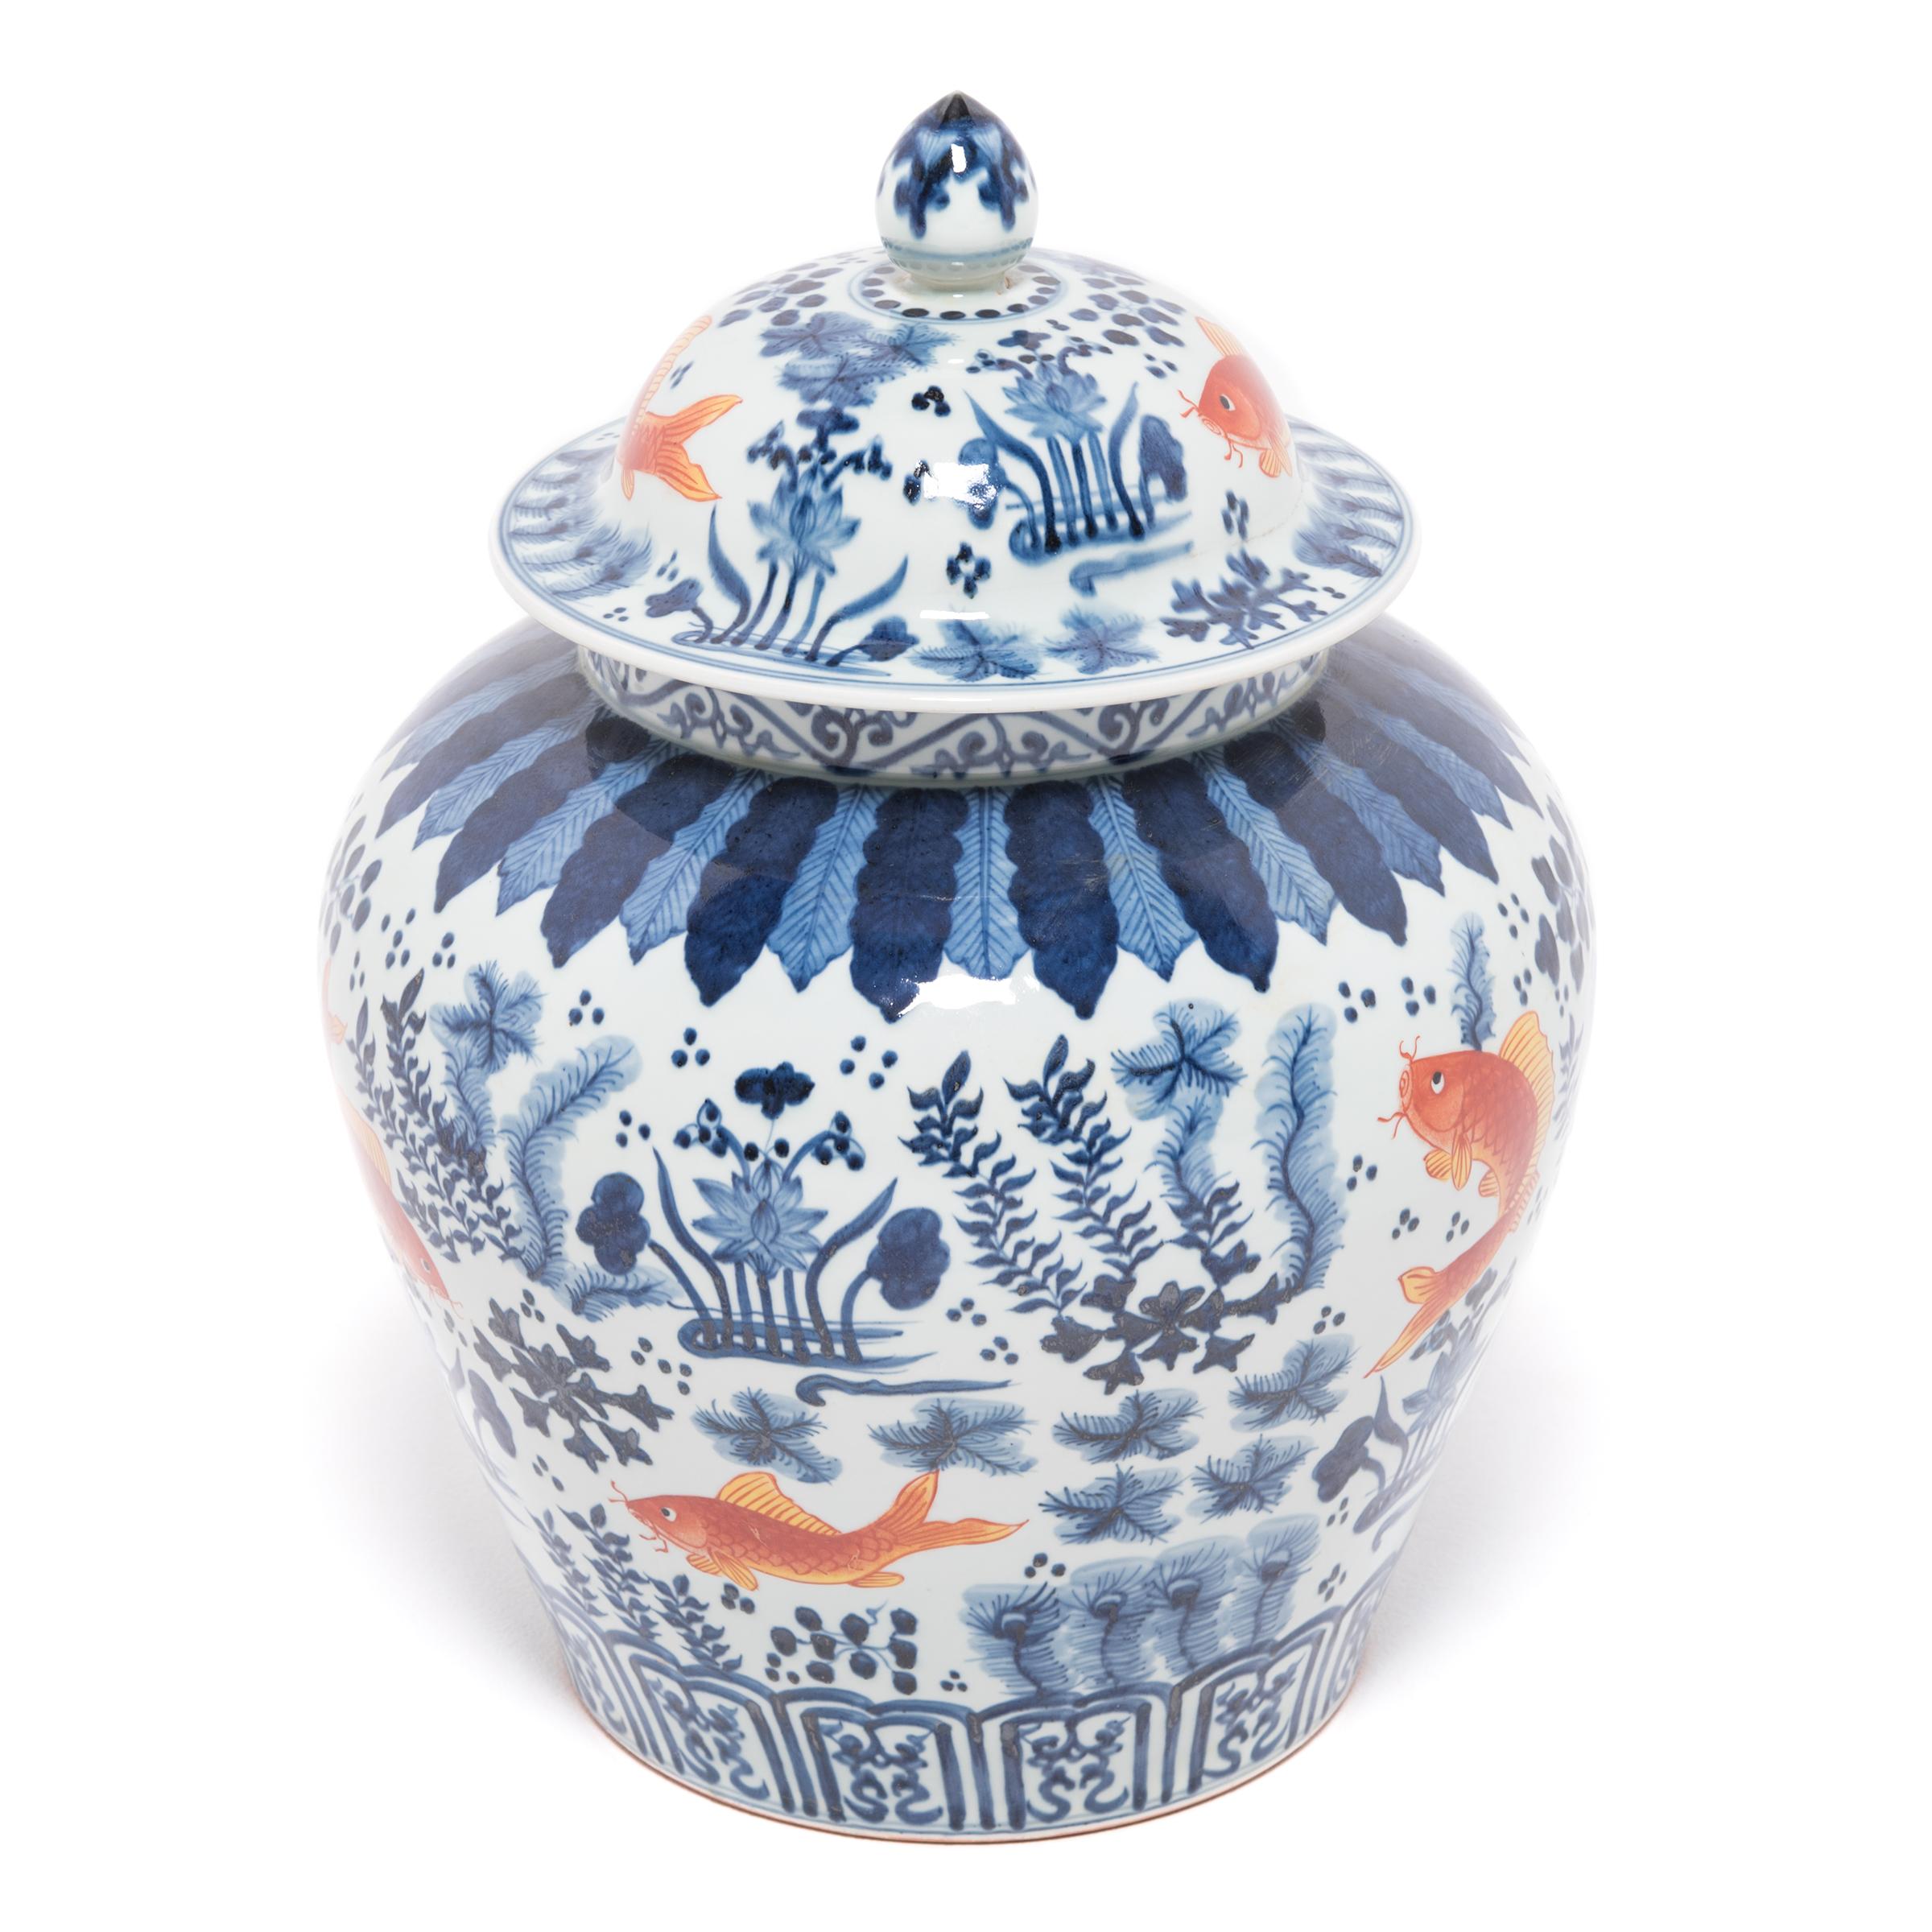 A modern artisan applied the vibrant copper and indigo imagery before firing, a process of under glazing that was developed during the Song dynasty. The finely painted symbols, fish, lotus pods, and underwater plants hold deeper meaning in Chinese